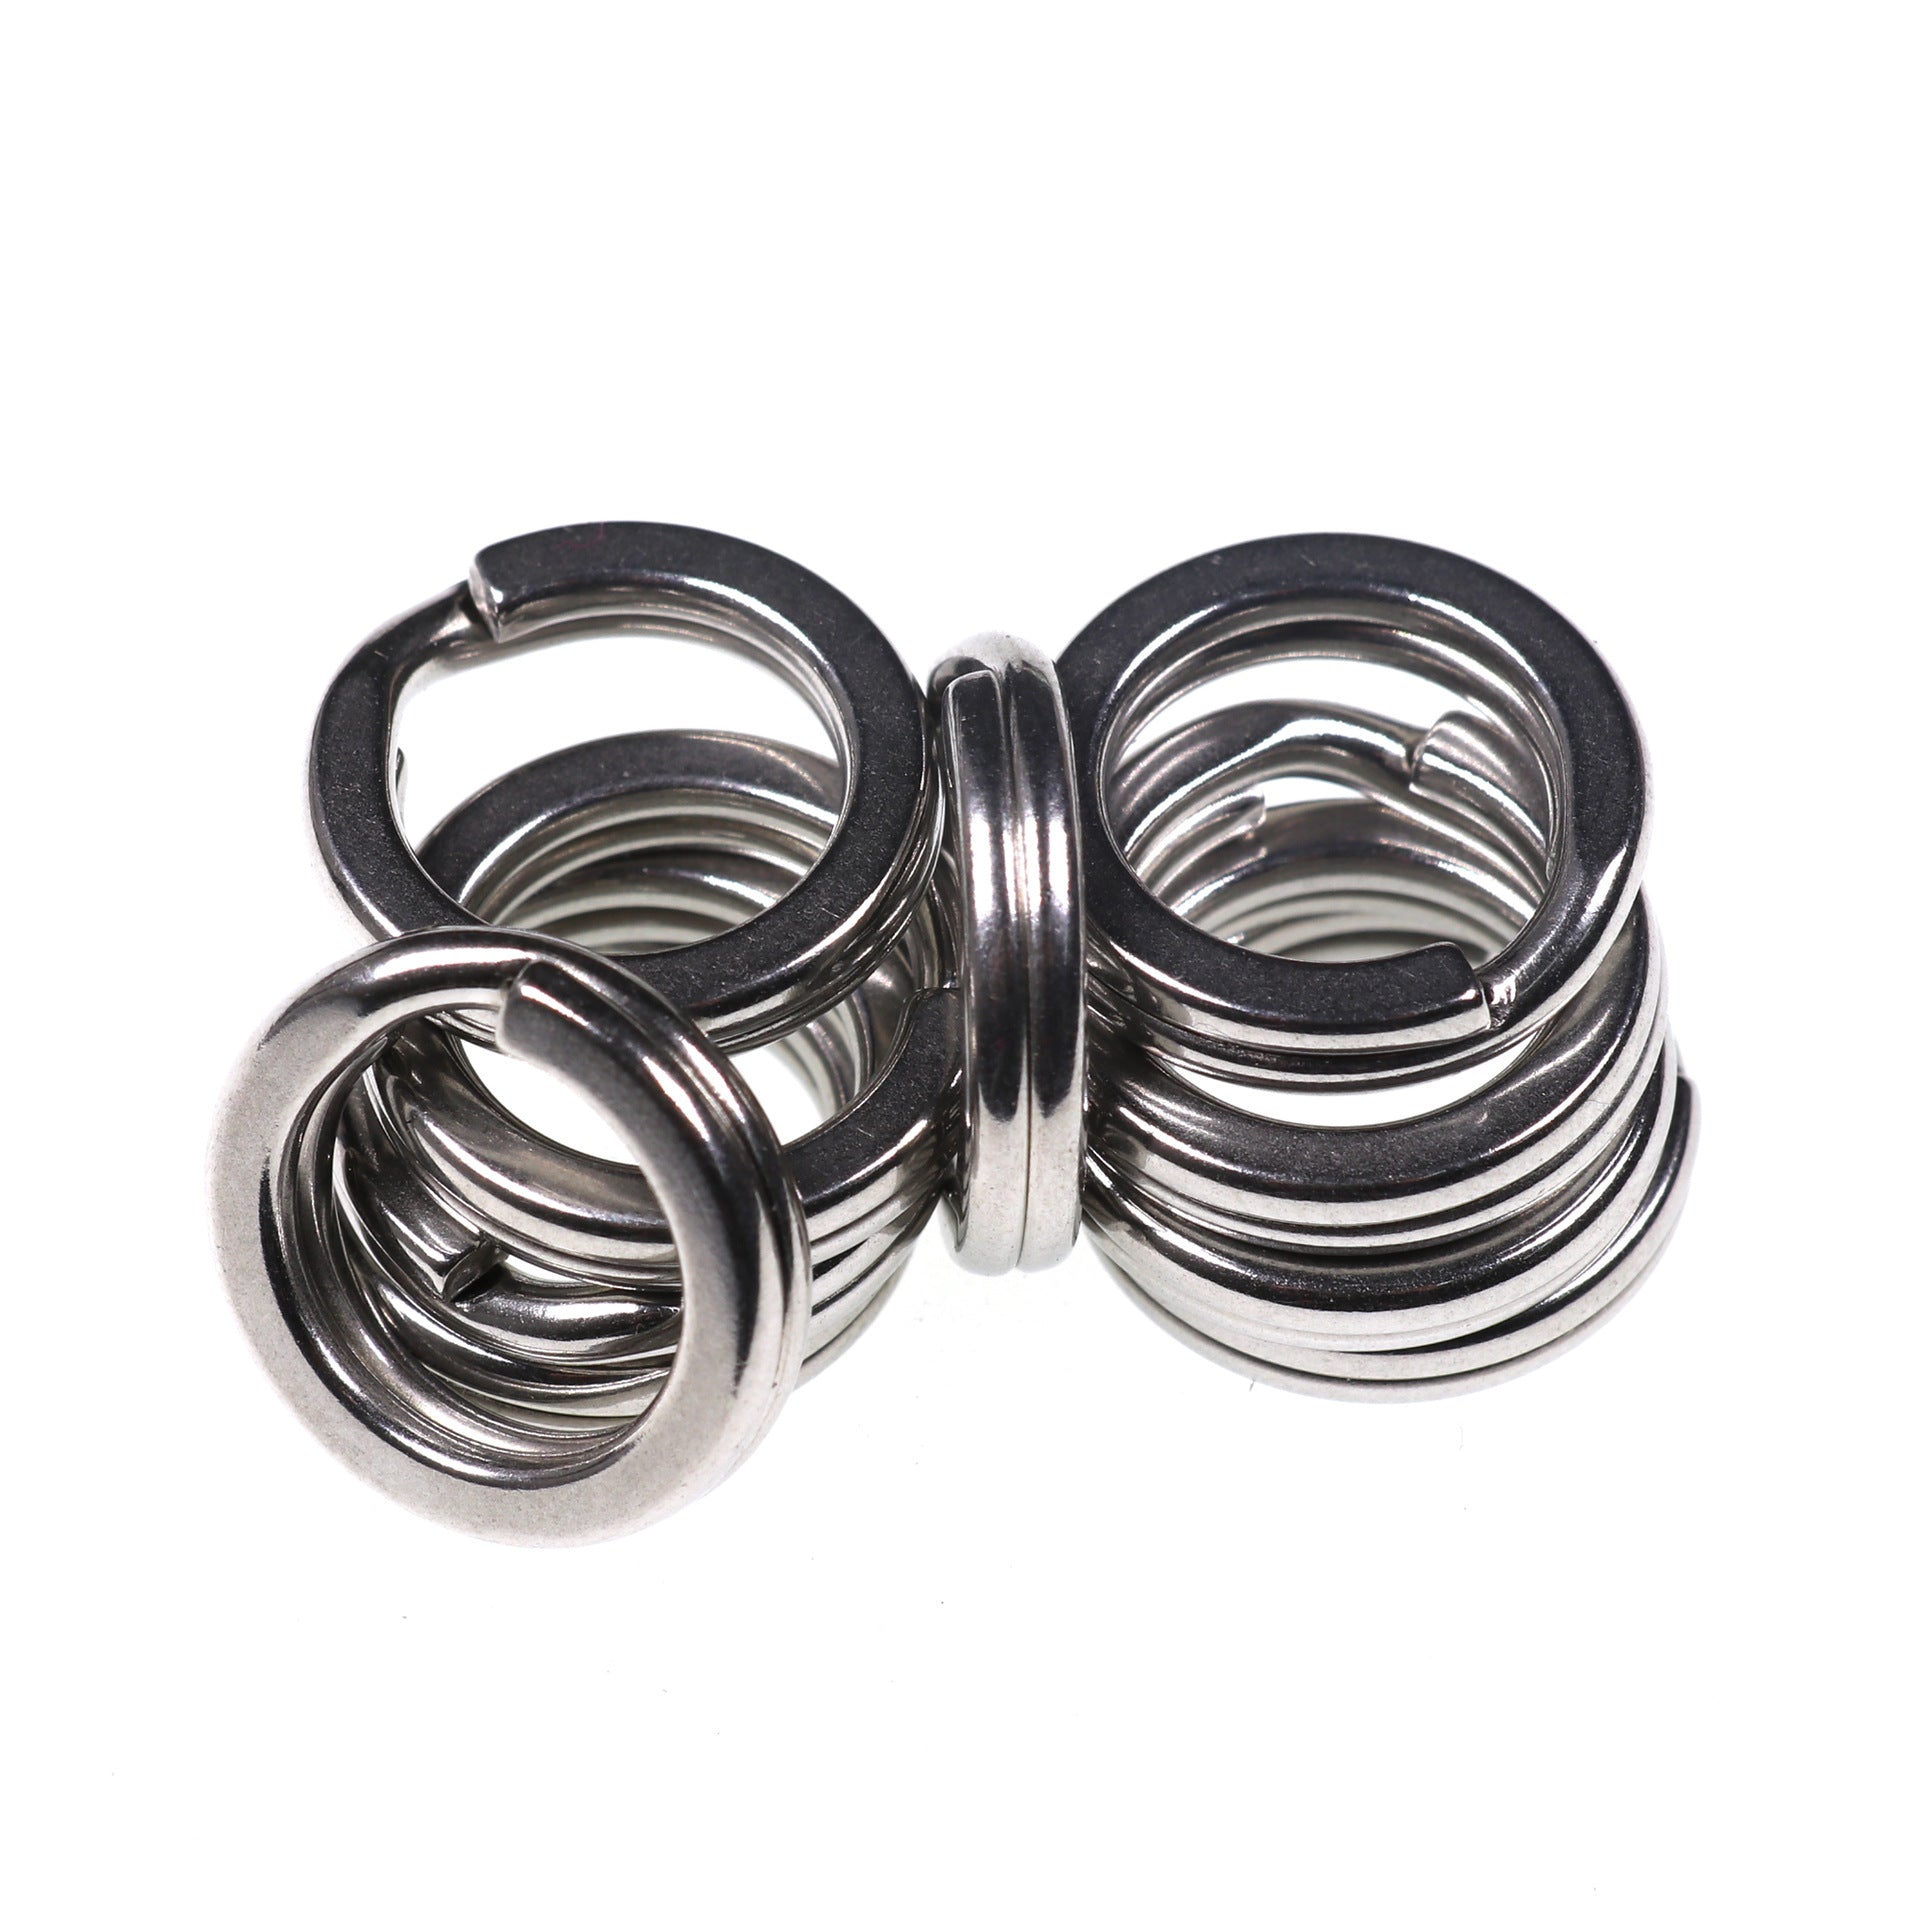 Gupbes Stainless Steel Oval Split Rings 100Pcs Heavy Duty Open Jump Rings  Silver Fishing Split Ring Swivel Snap Carp Fishing Lure Tackle Connector